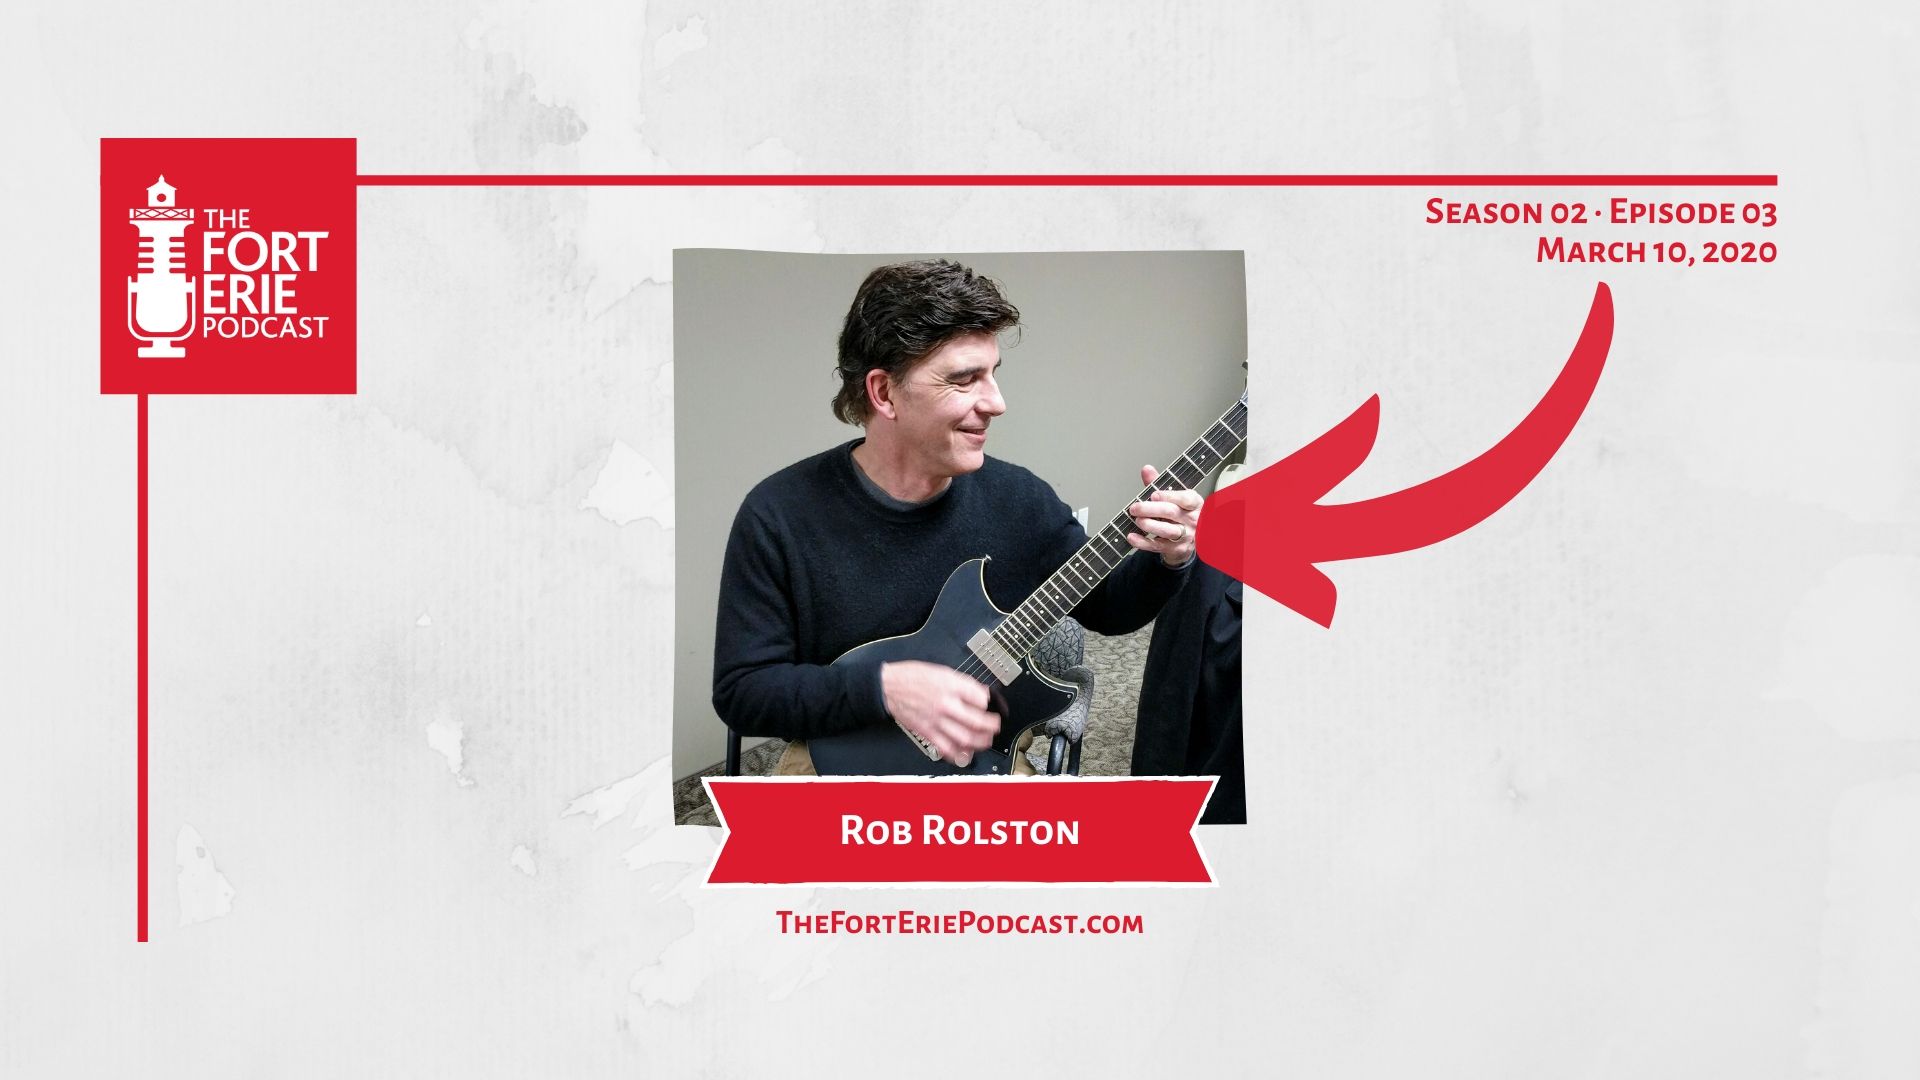 S02E03 – Rob Rolston, Fort Erie School of Music